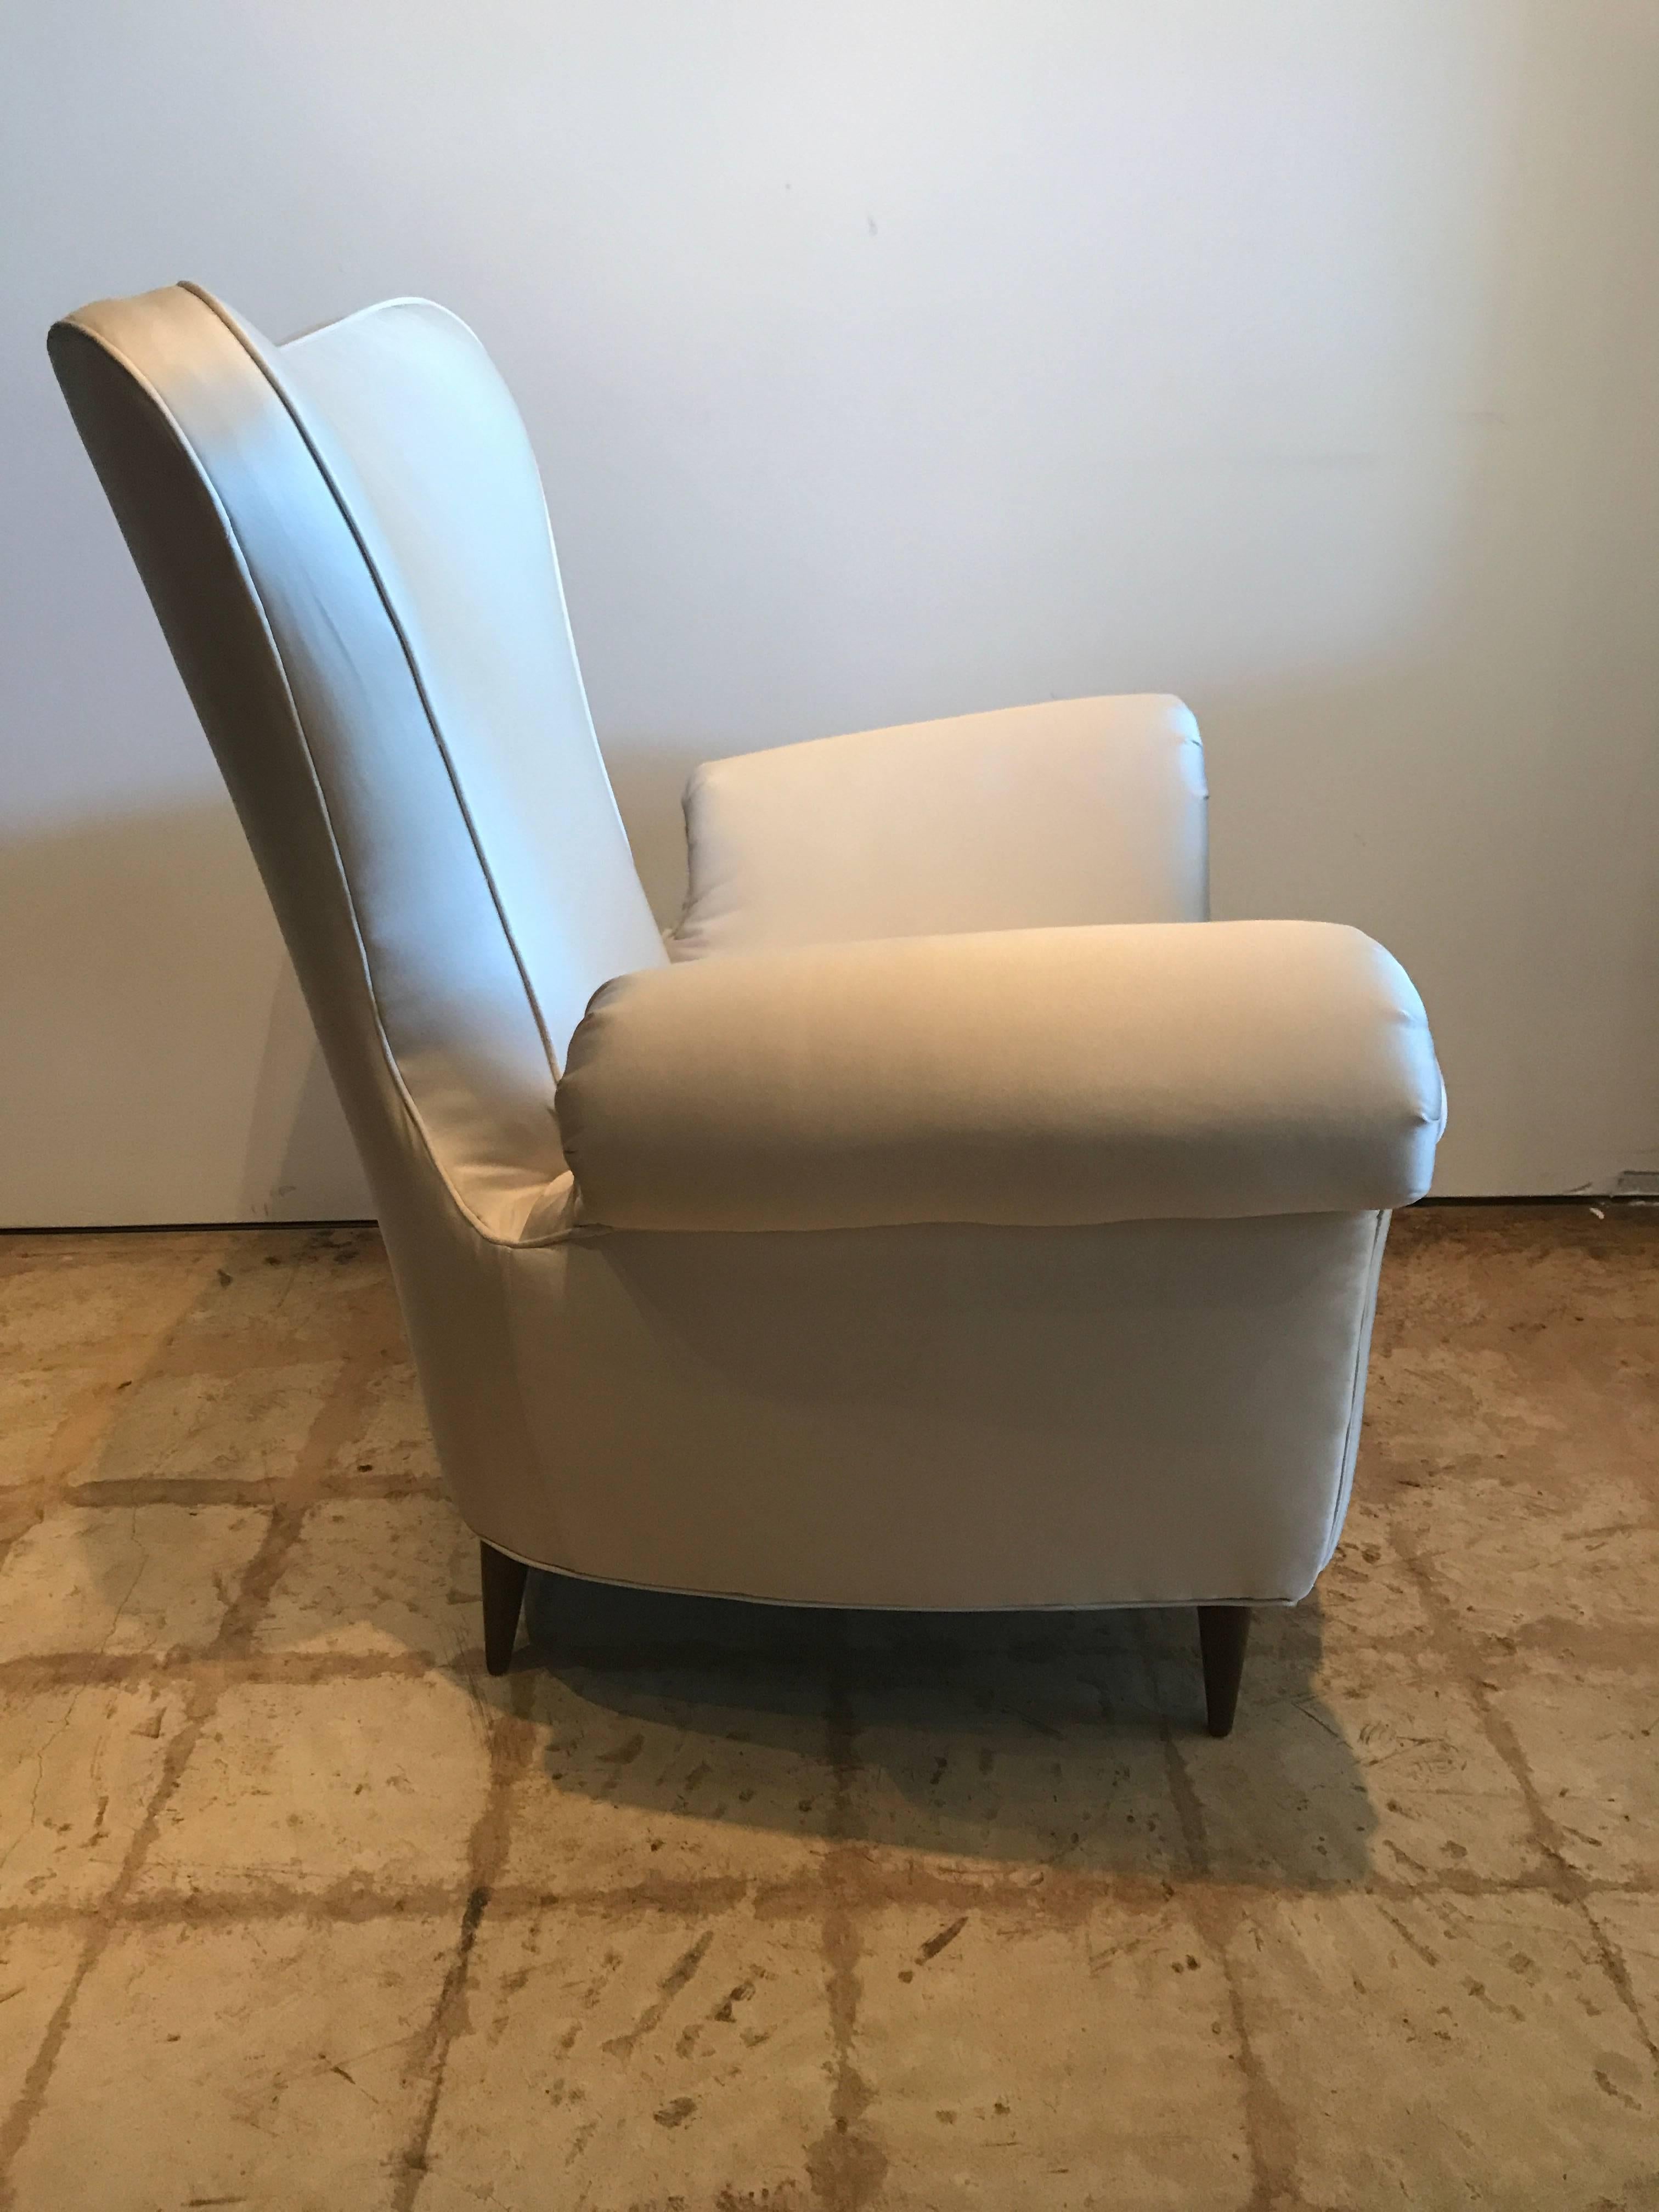 Italian Modern Upholstered Scrolled Arm Occasional Chair, Paolo Buffa, 1950's For Sale 5